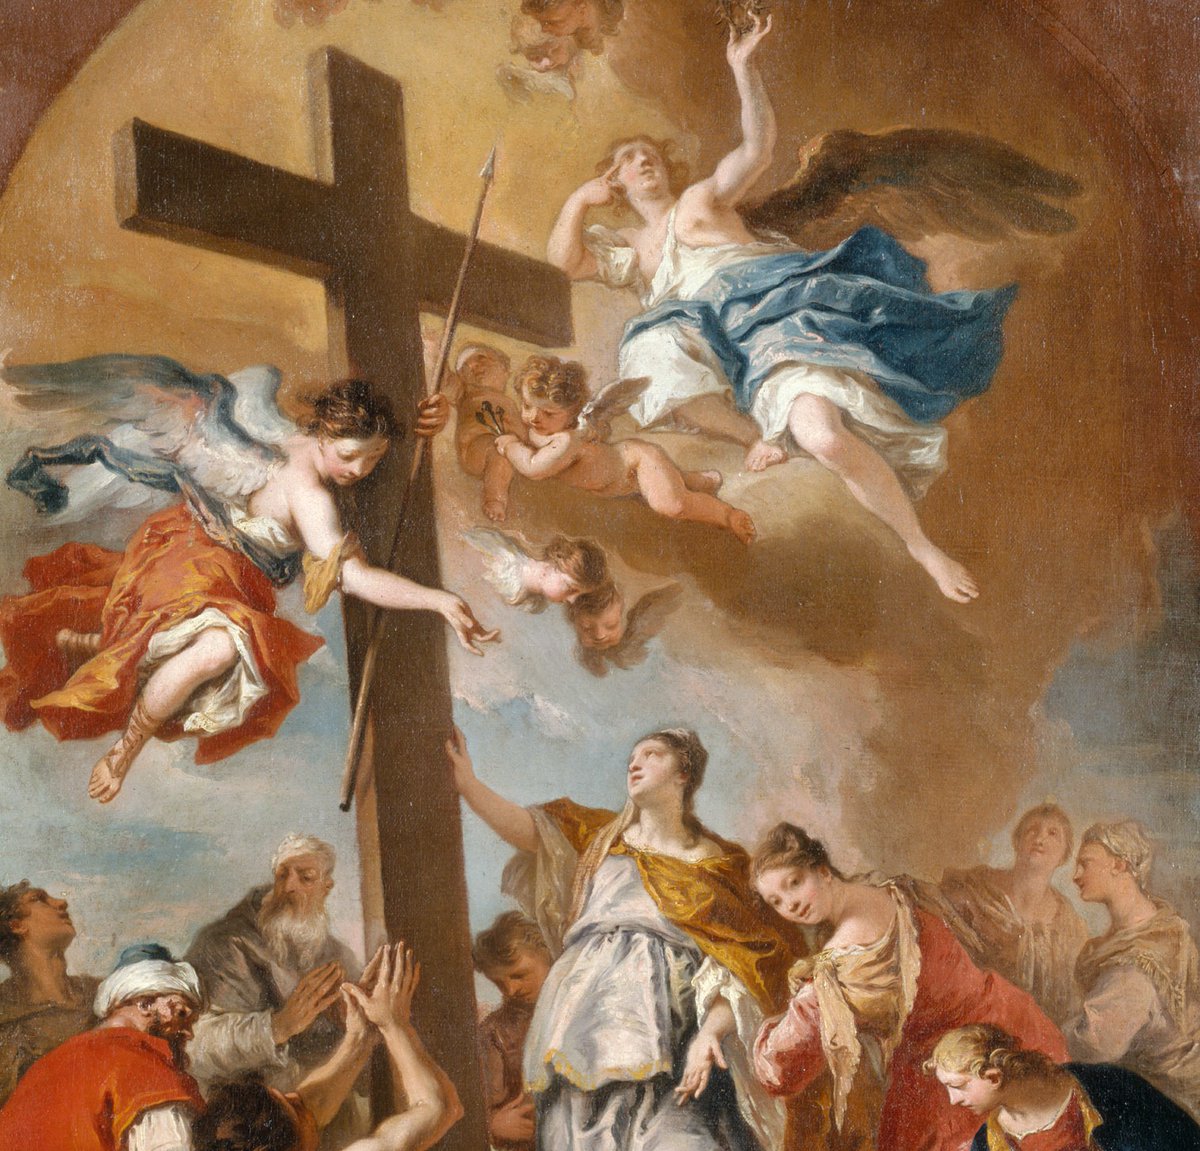 “Apart from the cross there is no other ladder by which we may get to heaven.” - Saint Rose of Lima

Happy feast of the Finding of the Cross!

#Catholic #Catholicism #CatholicChurch #FeastDay #Scripture #Tradition #PrayForUs #HolyMenAndWomen